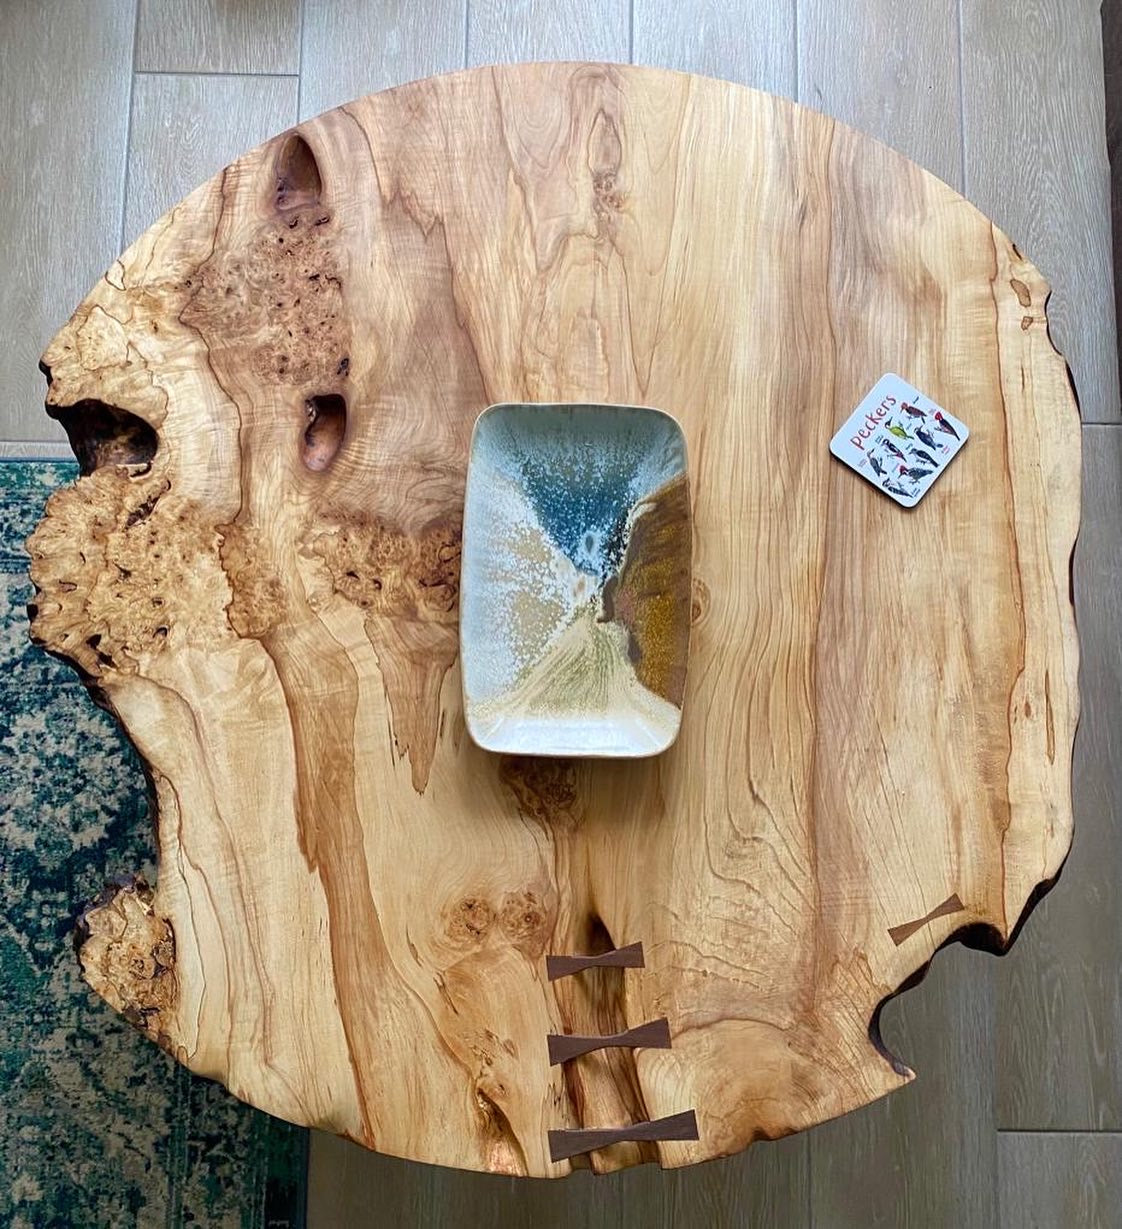 Commission 5. Live Edge Horsechestnut Coffee Table with Butterfly inlay